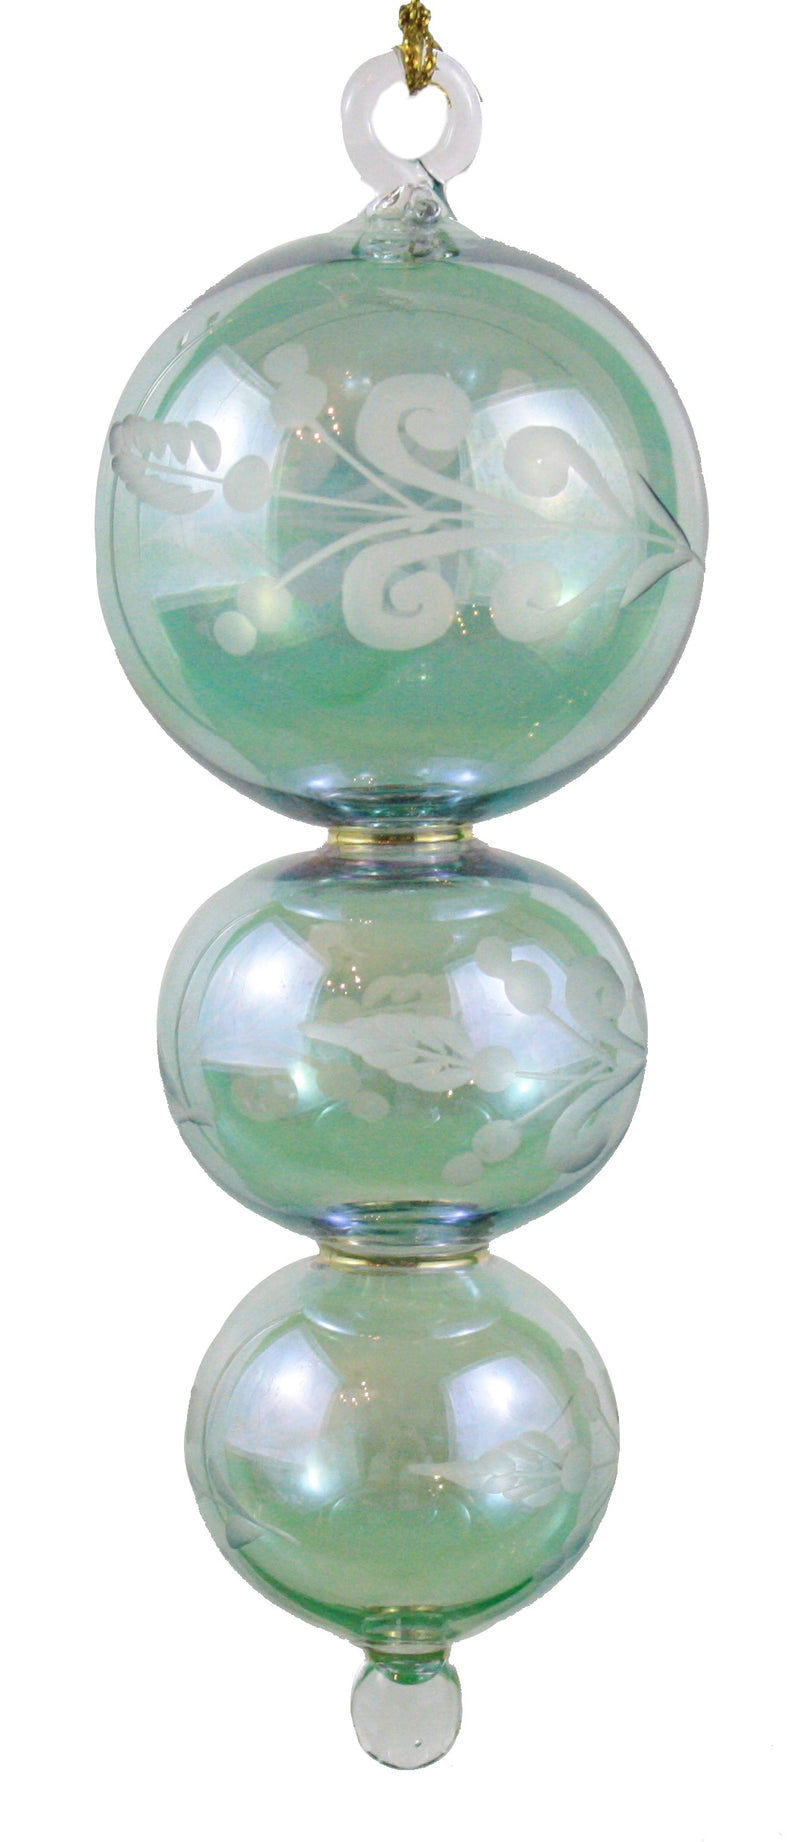 Mid Size Crystal 3 Section Ball with Gold Etching Ornament - Green